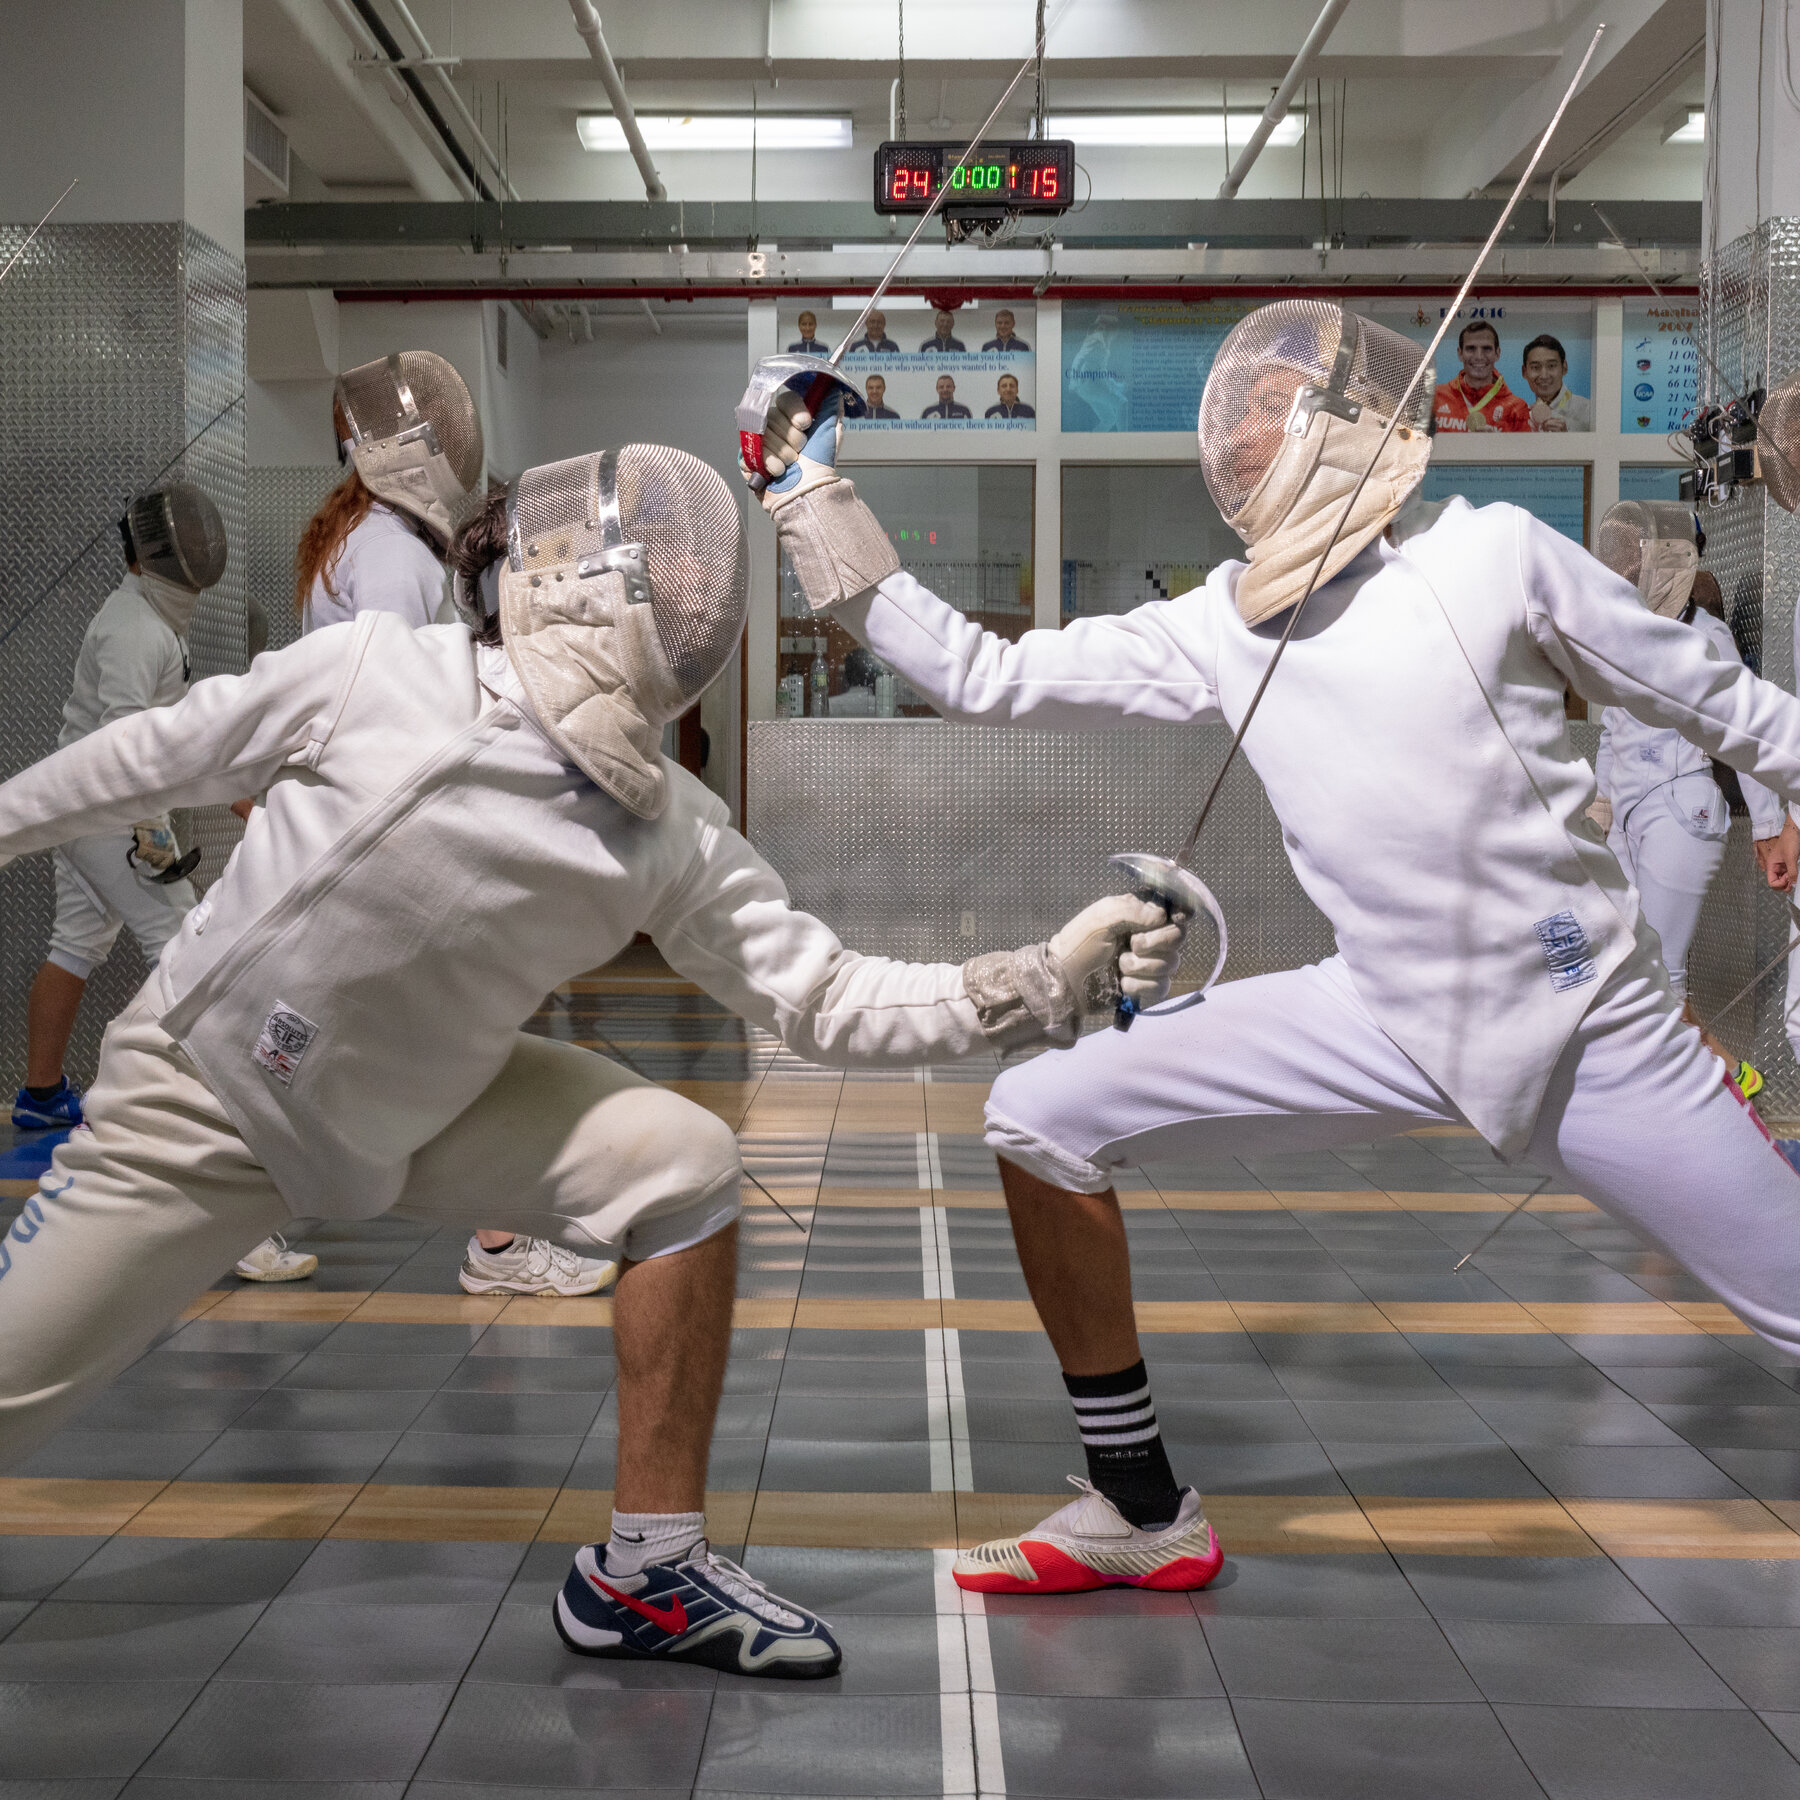 Why Is Fencing Called Fencing? Exploring the Origins of This Popular Sport